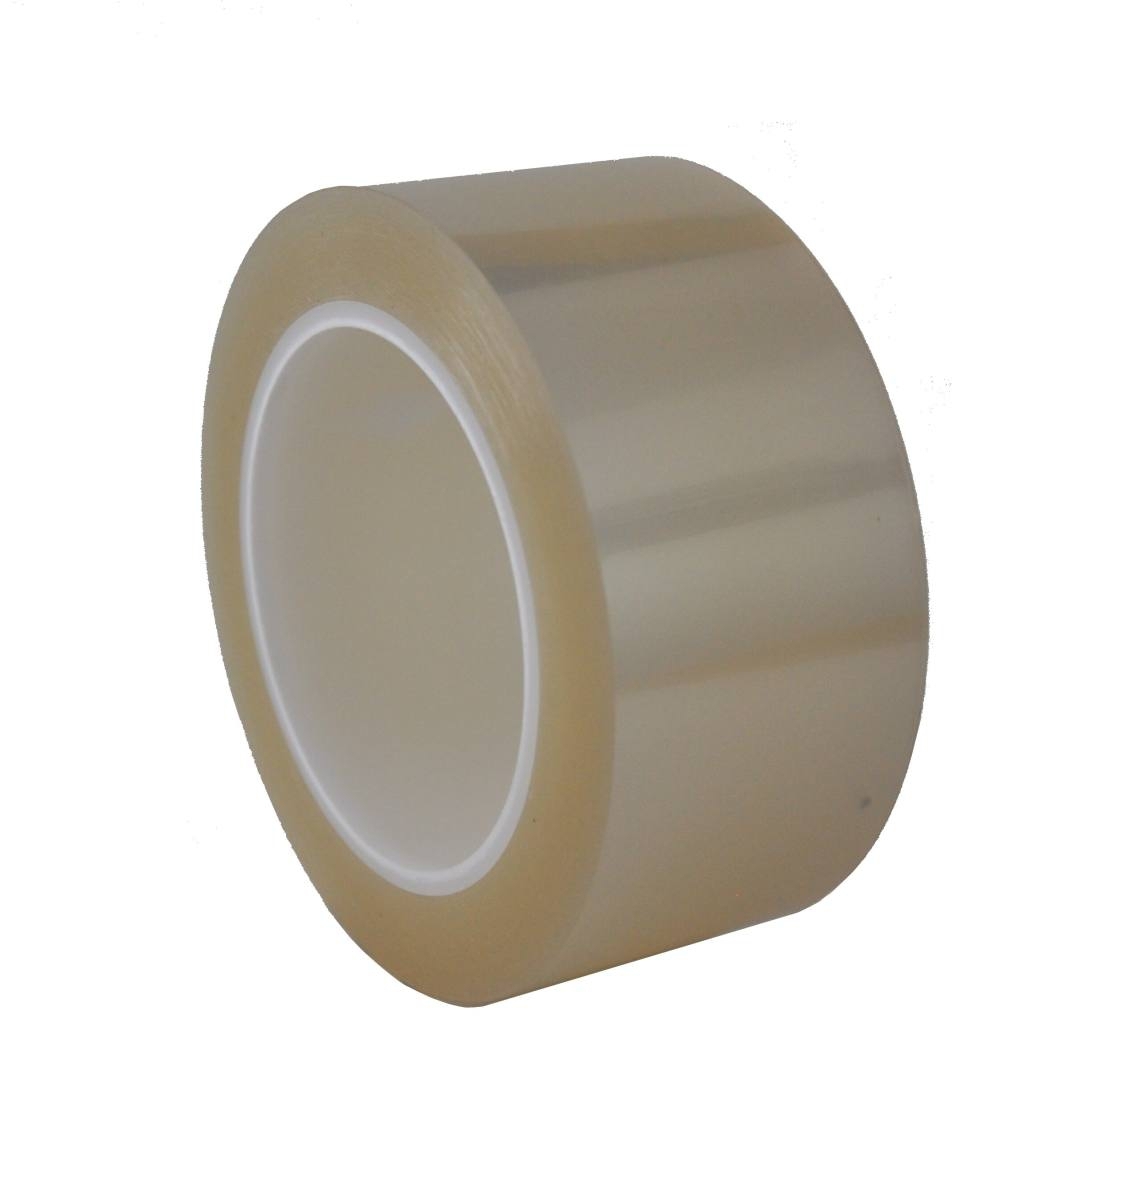 SKS fluorosilicone film, polyester film 0.075mm, 400mmx100m, coated on one side with fluorosilicone, transparent